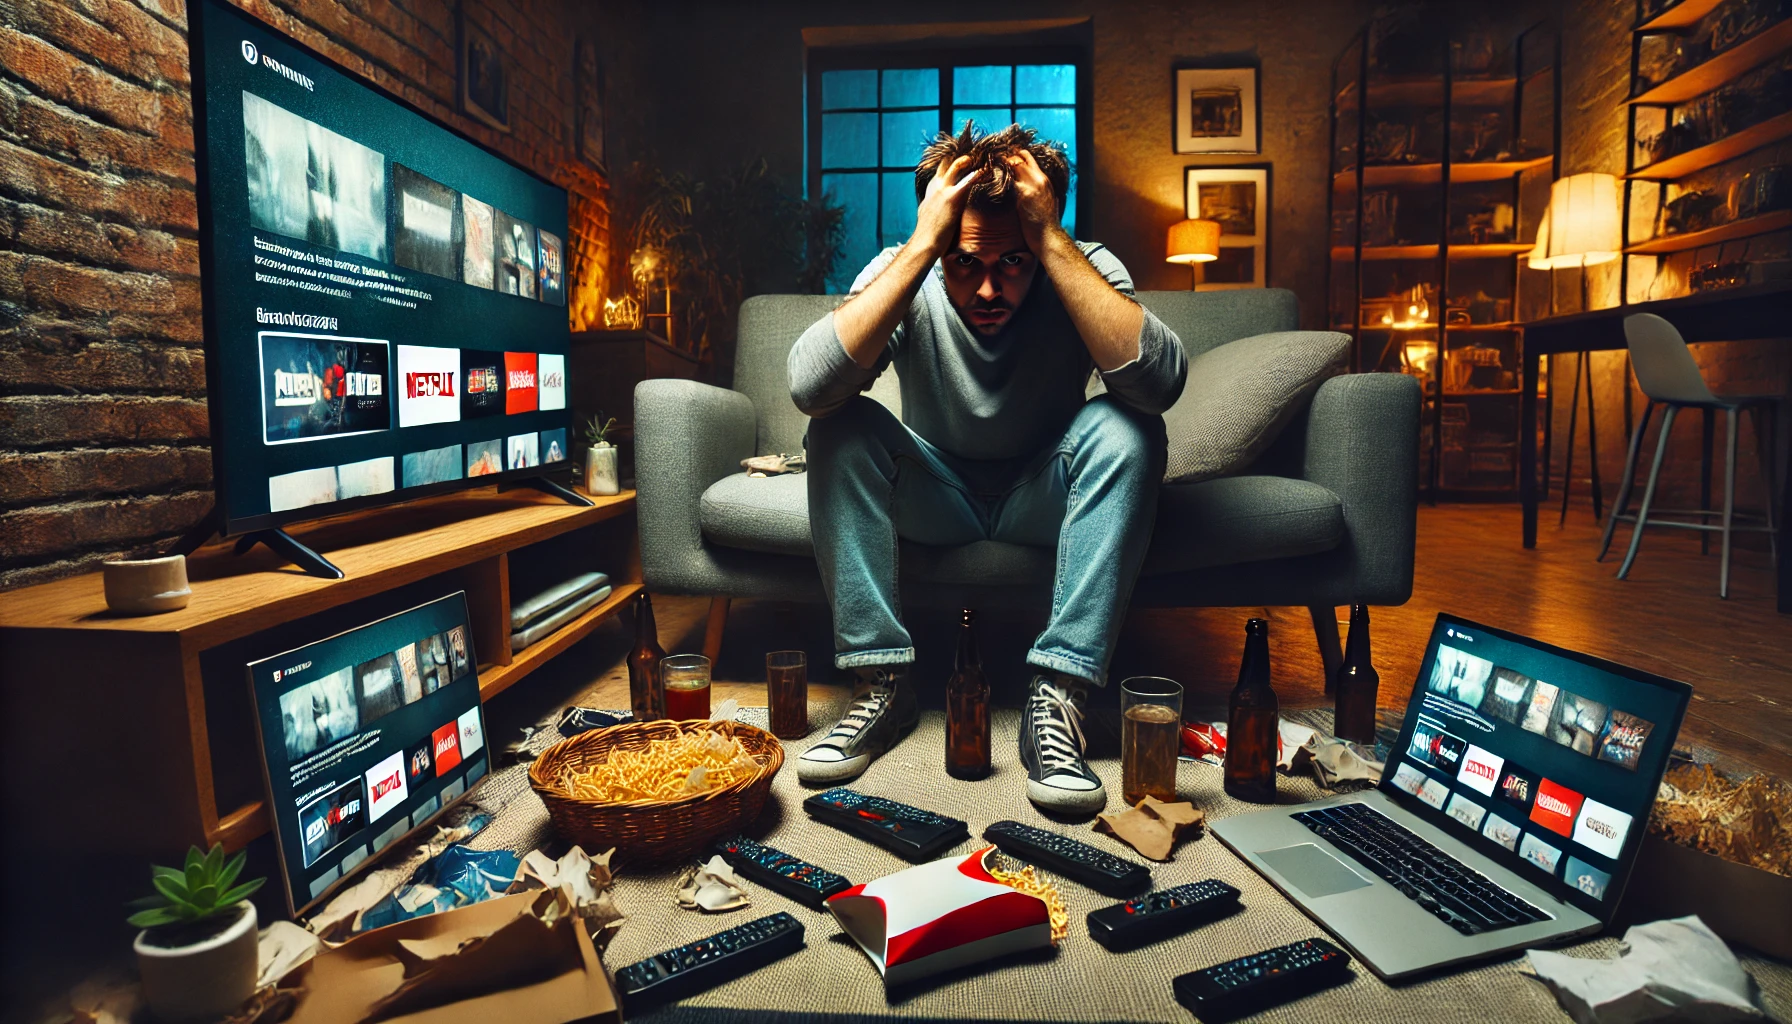 Her Platforma Üye Olmak Zorunda Mıyız? 1 – DALL·E 2024 06 23 15.08.59 A distraught man sitting on a couch in a dimly lit living room surrounded by various digital devices like a TV laptop and smartphone all showing s